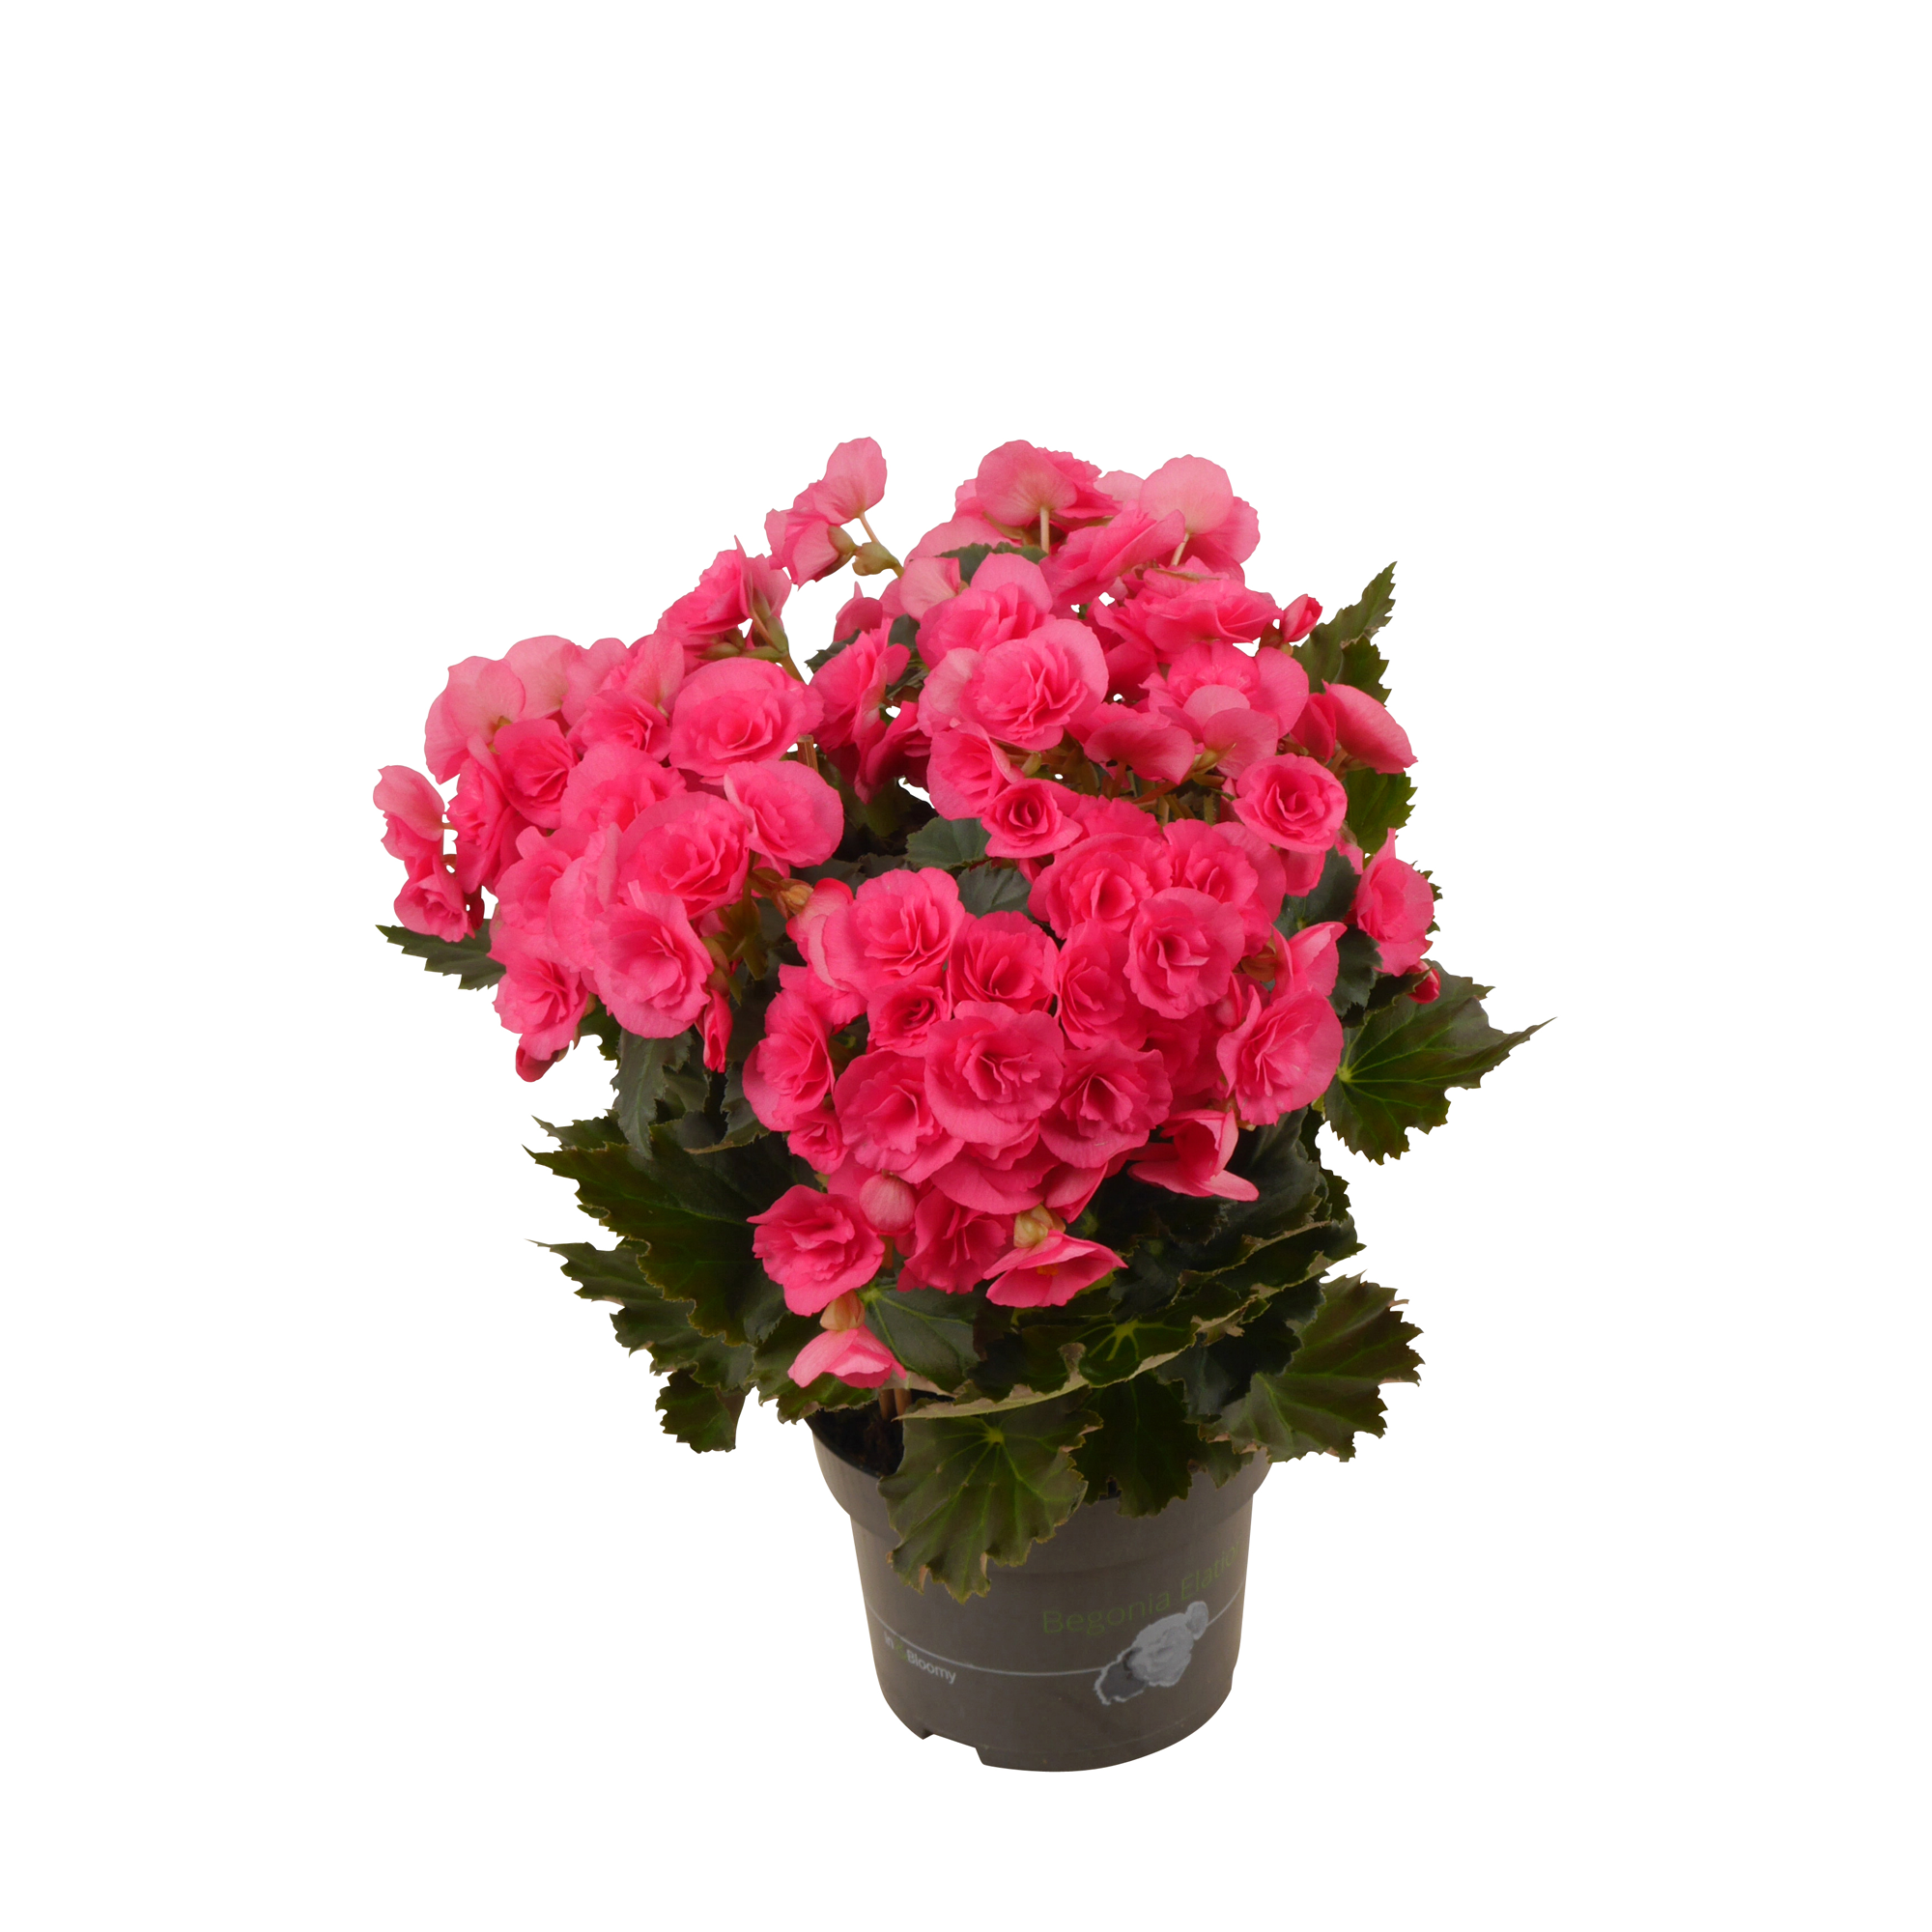 Begonie rosa, 13 cm Topf + product picture